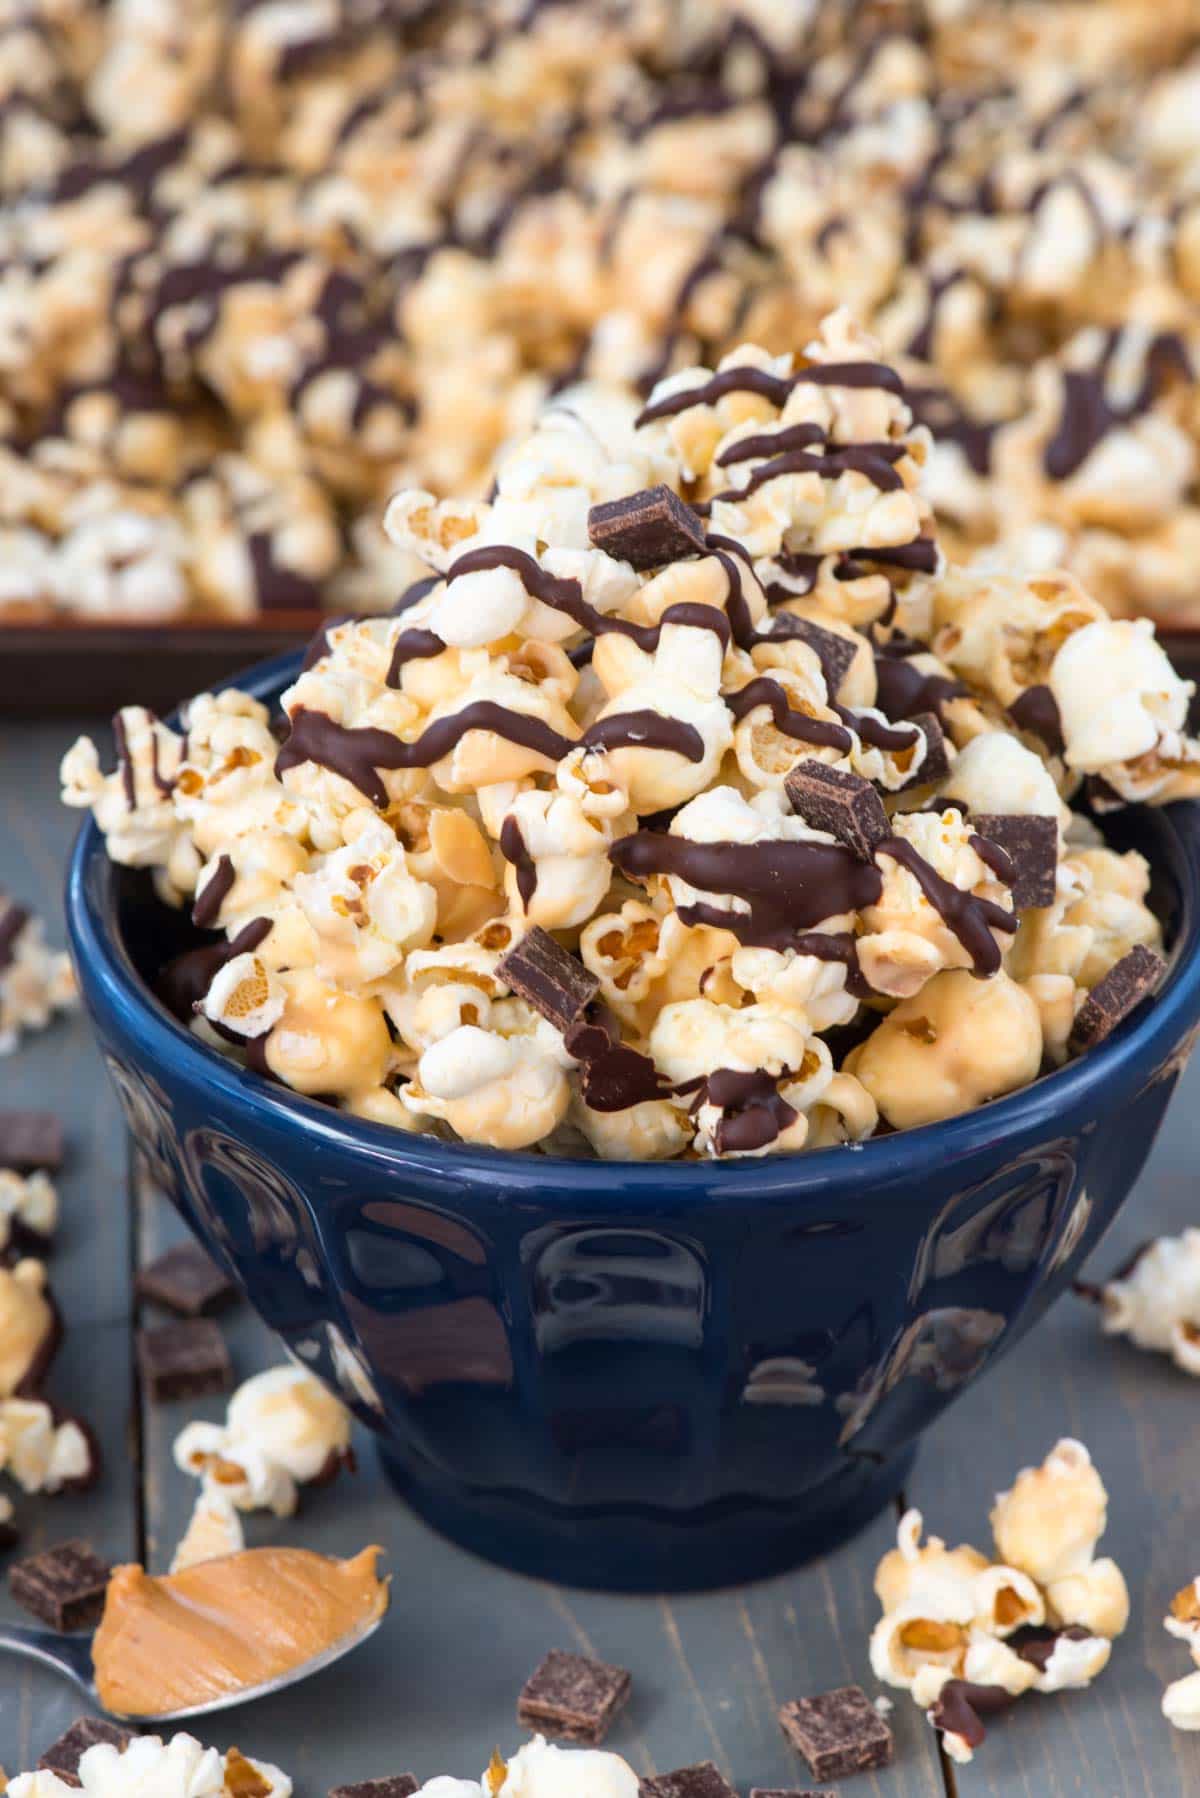 Chocolate Peanut Butter Popcorn is an easy 4 ingredient popcorn recipe that is perfect for dessert or movie night, or for gifting!